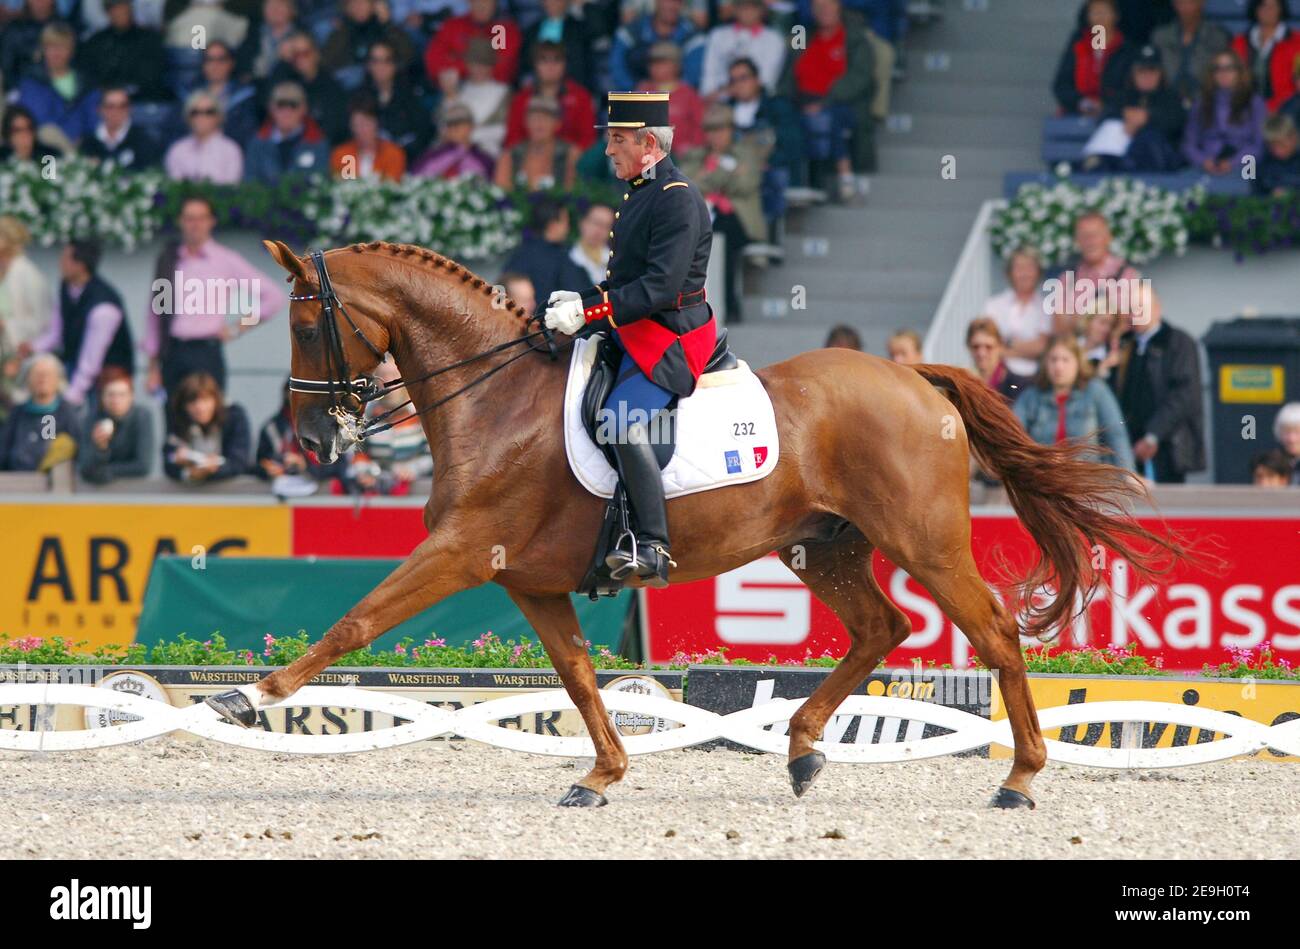 French dressage rider Hubert Perring on his horse 'Diabolo Saint Maurice ' at the FEI World Equestrian Games 2006 in Aachen, Germany, on August 22, 2006. German team won the gold medal. Photo by Edwin Cooke/Cameleon/ABACAPRESS.COM Stock Photo